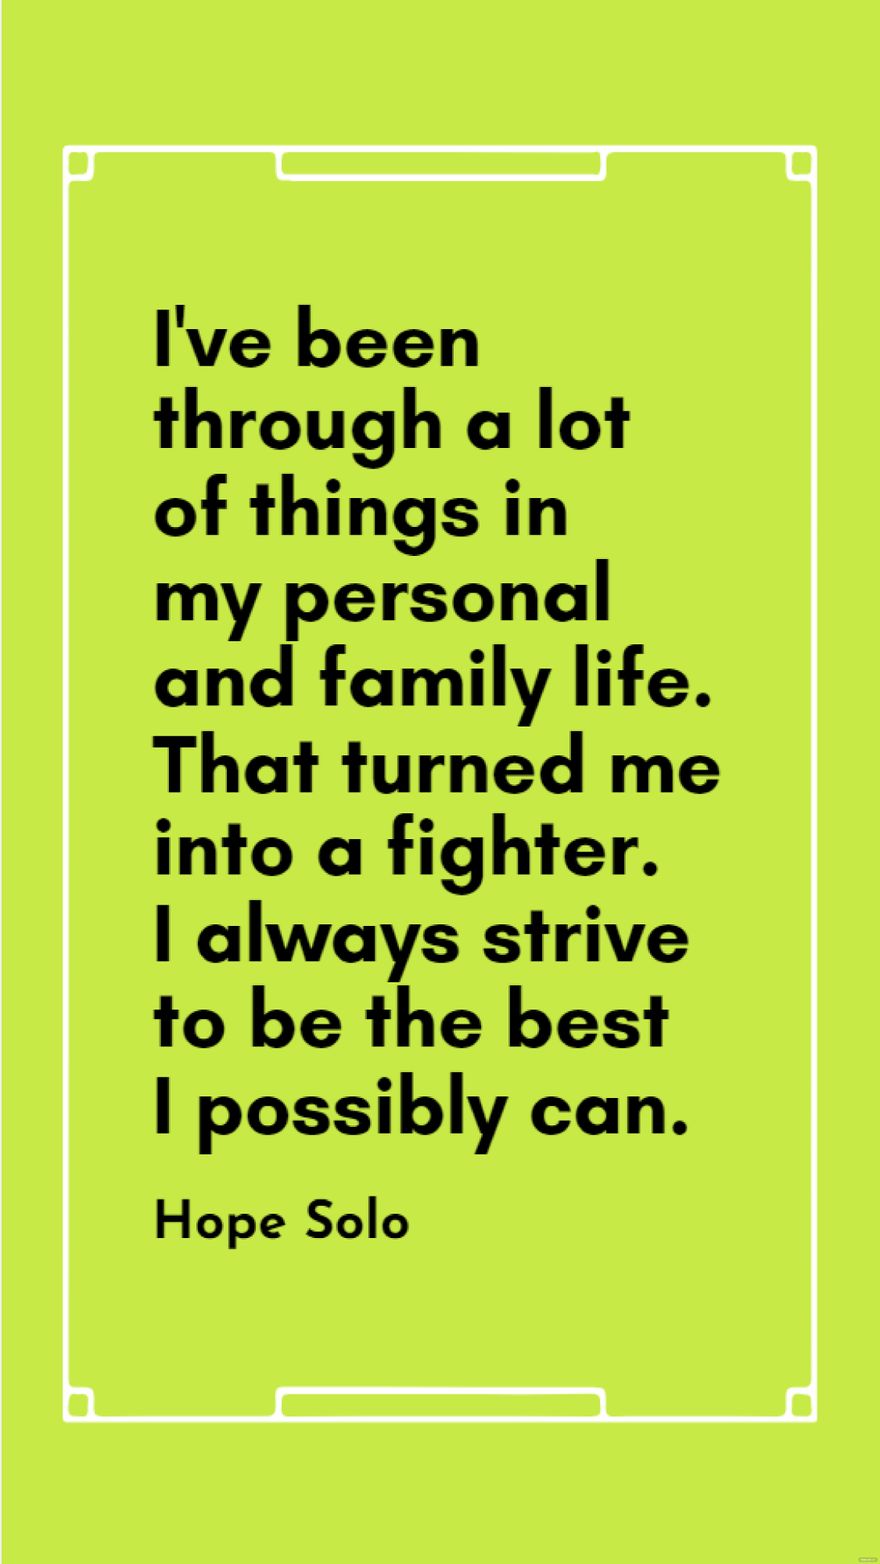 Hope Solo - I've been through a lot of things in my personal and family life. That turned me into a fighter. I always strive to be the best I possibly can.